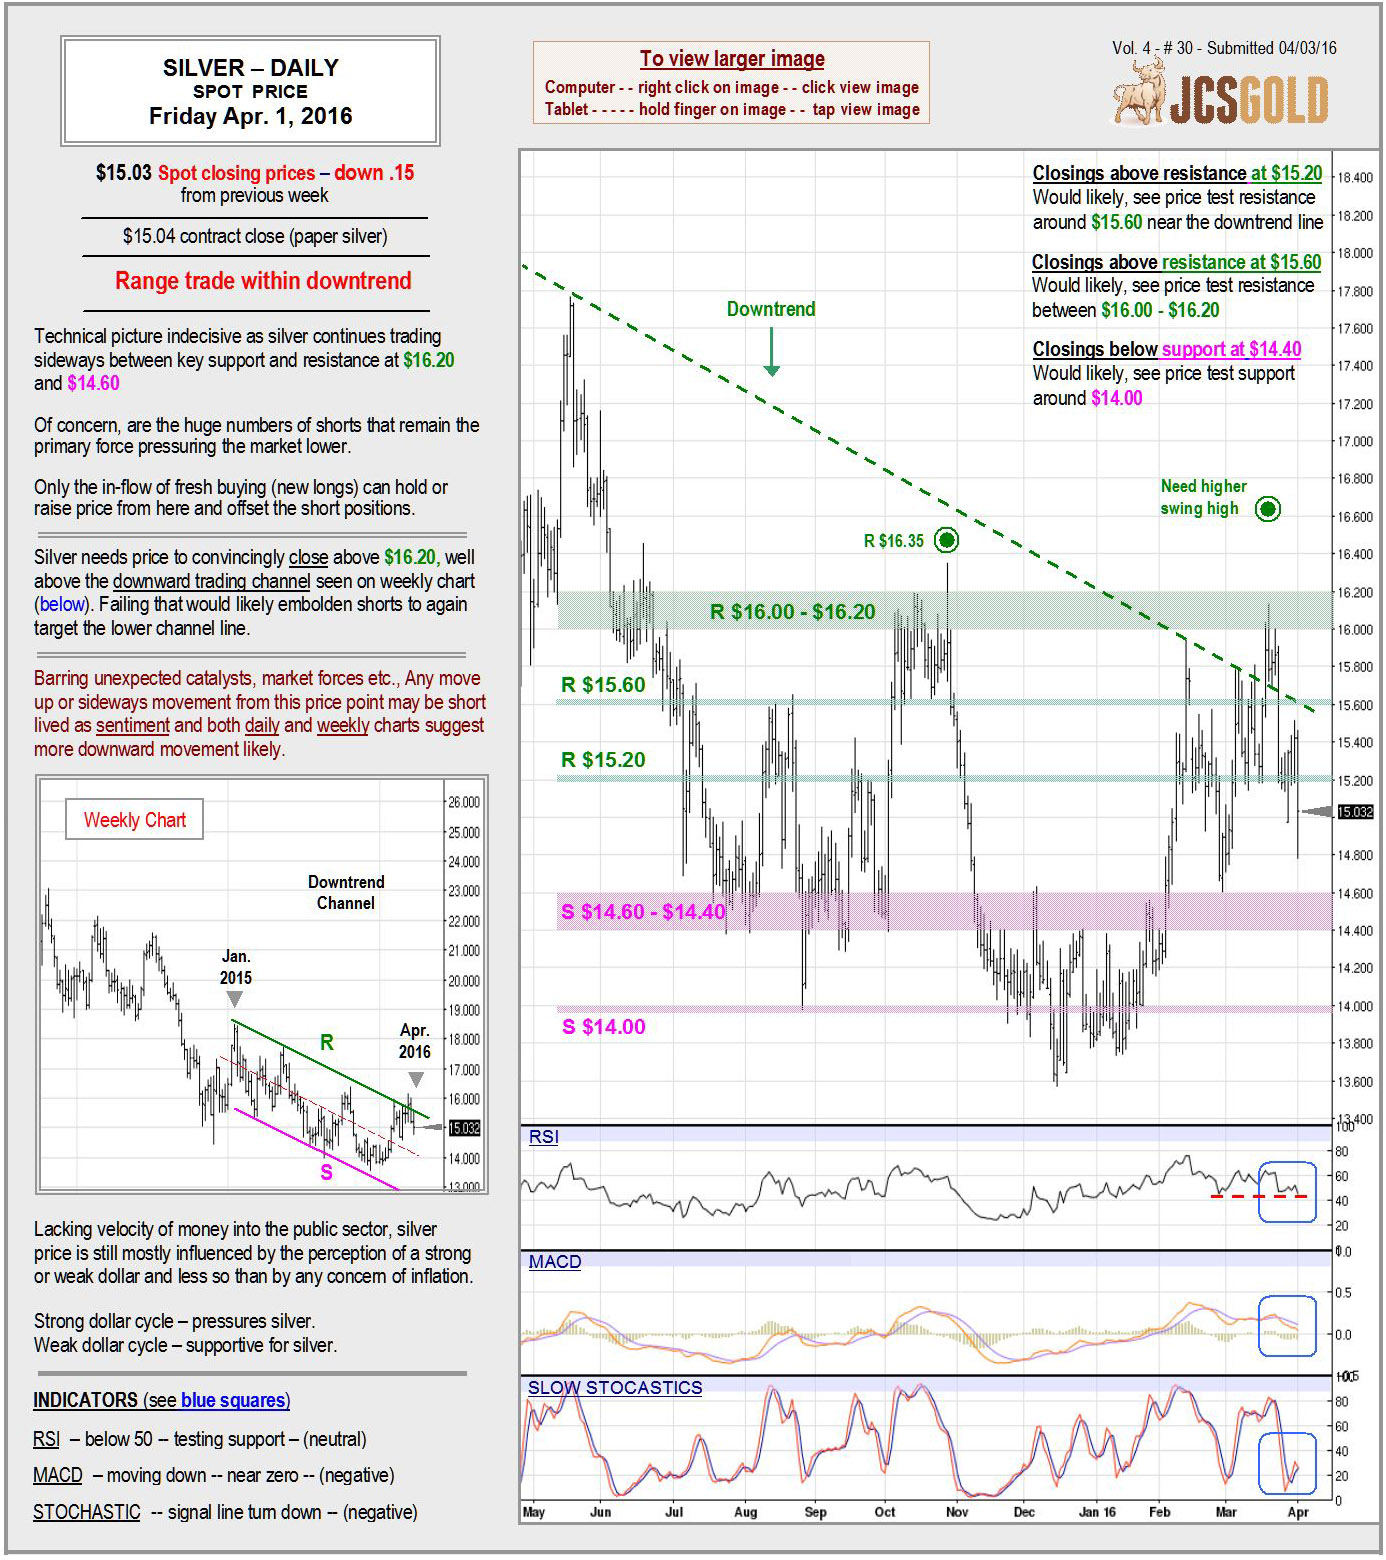 April 1, 2016 chart & commentary